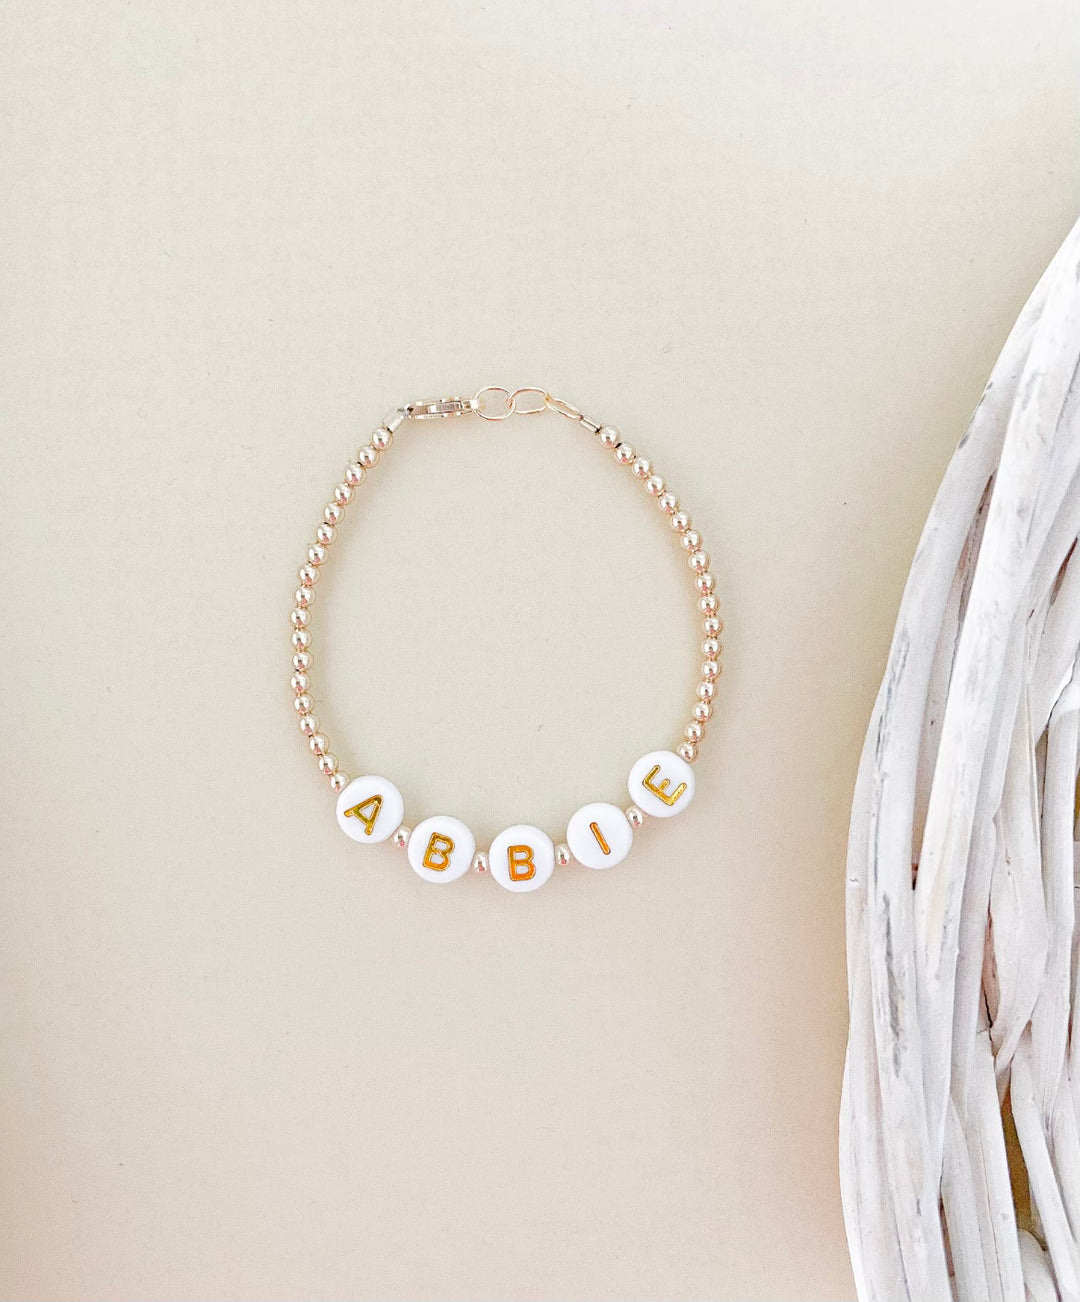 Personalized Name Mommy & Baby Bracelet in 14K Gold Filled Beads